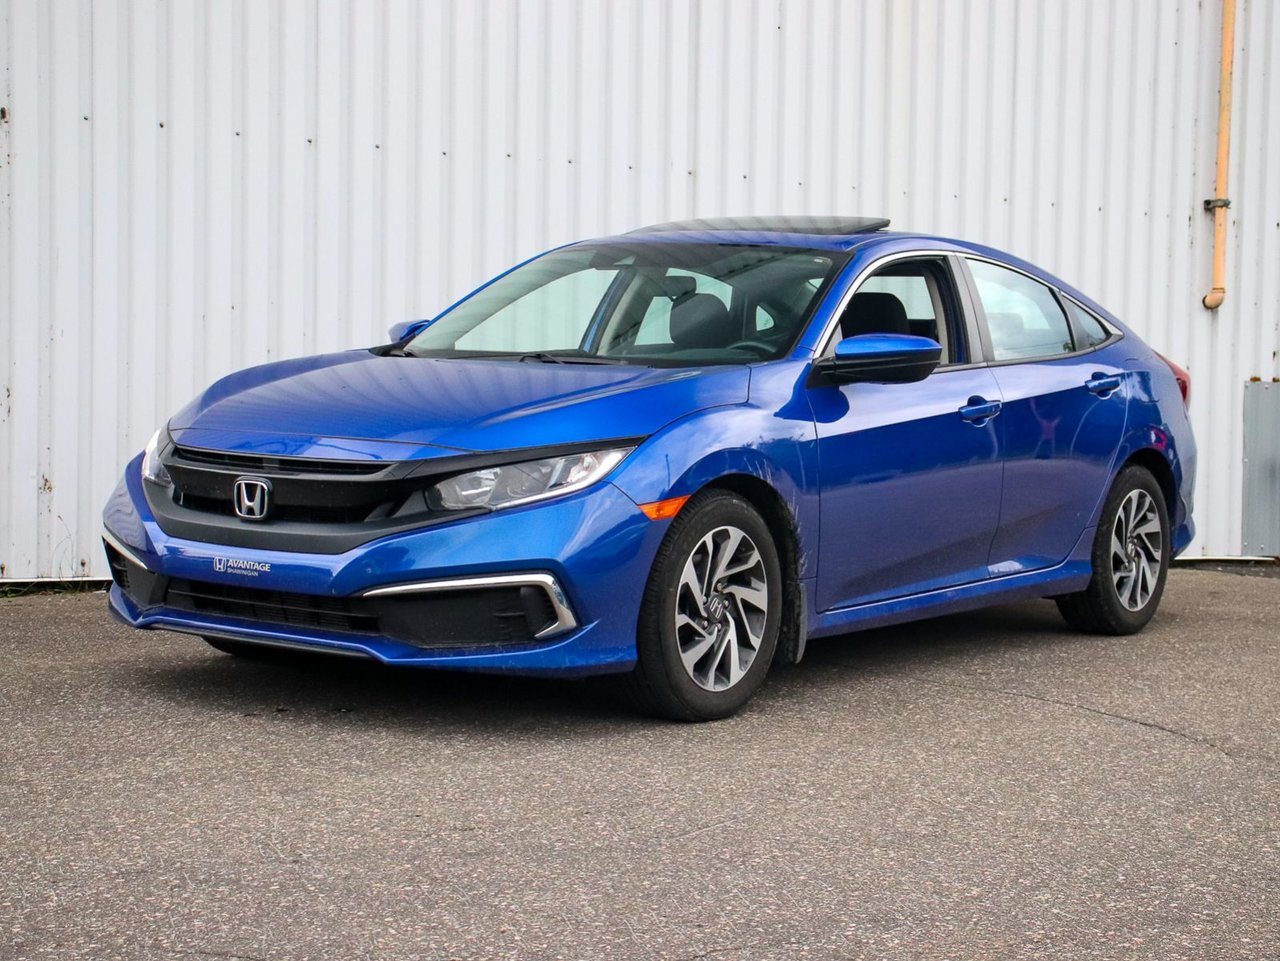 Used 2019 Honda Civic With 27718 Km For Sale At Otogo